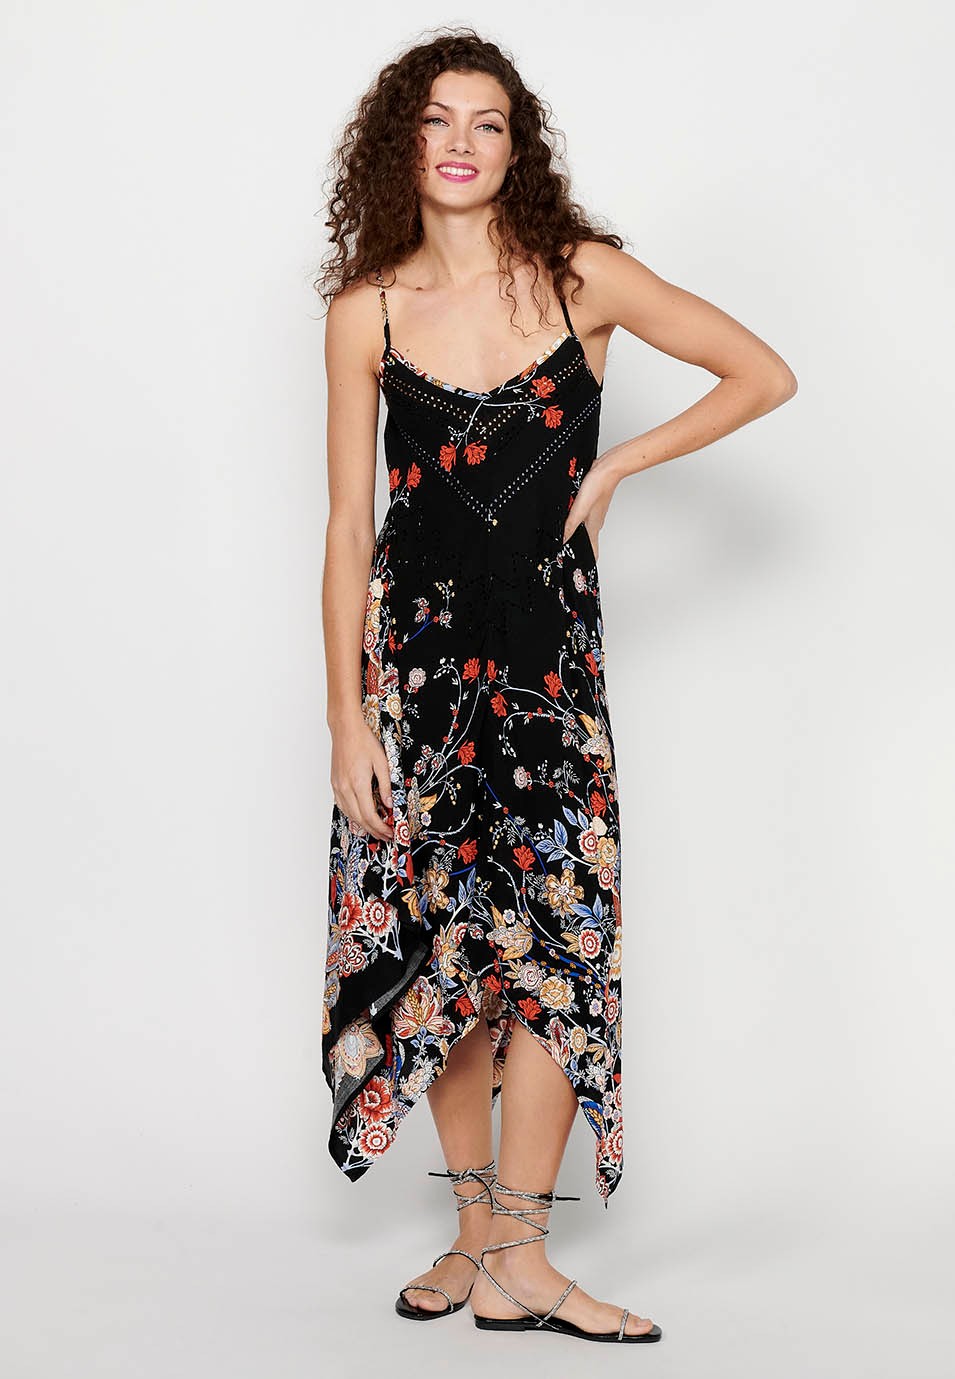 Strap Dress with V-neck and Black Floral Print for Women 1